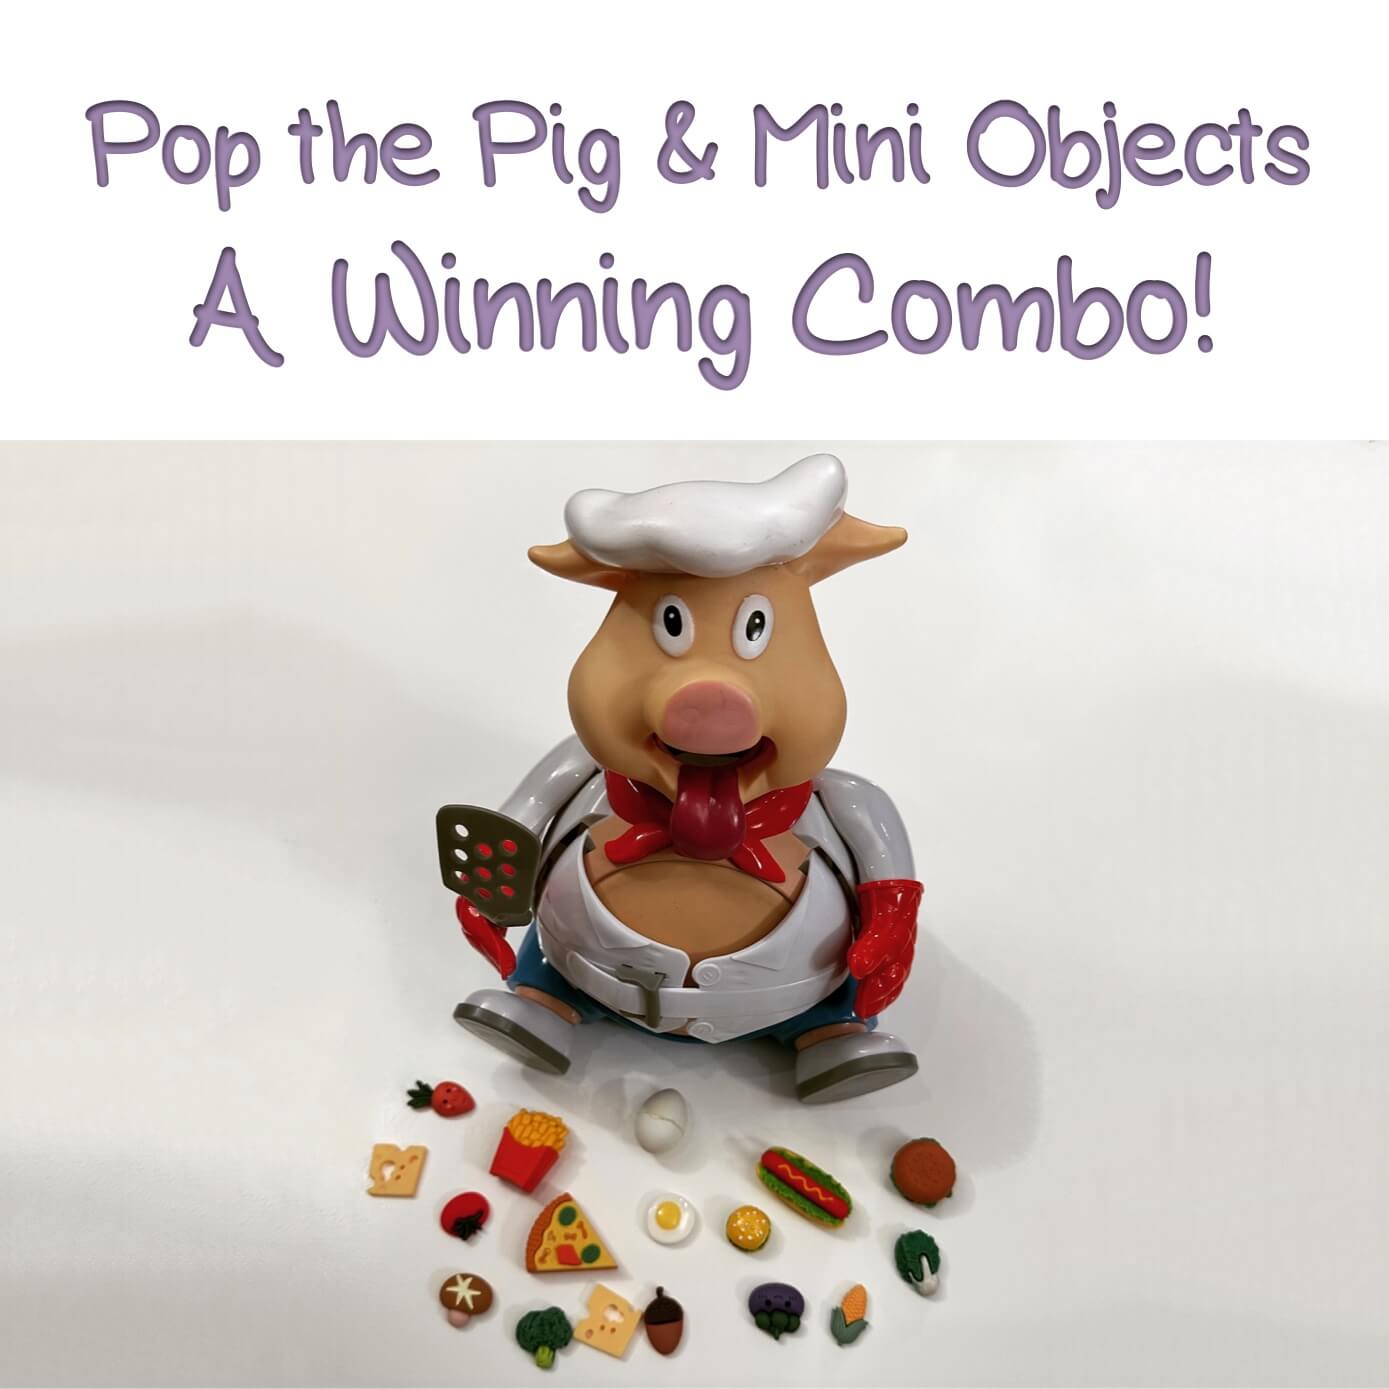 “Pop the Pig and Mini Objects: a Winning Combo!”